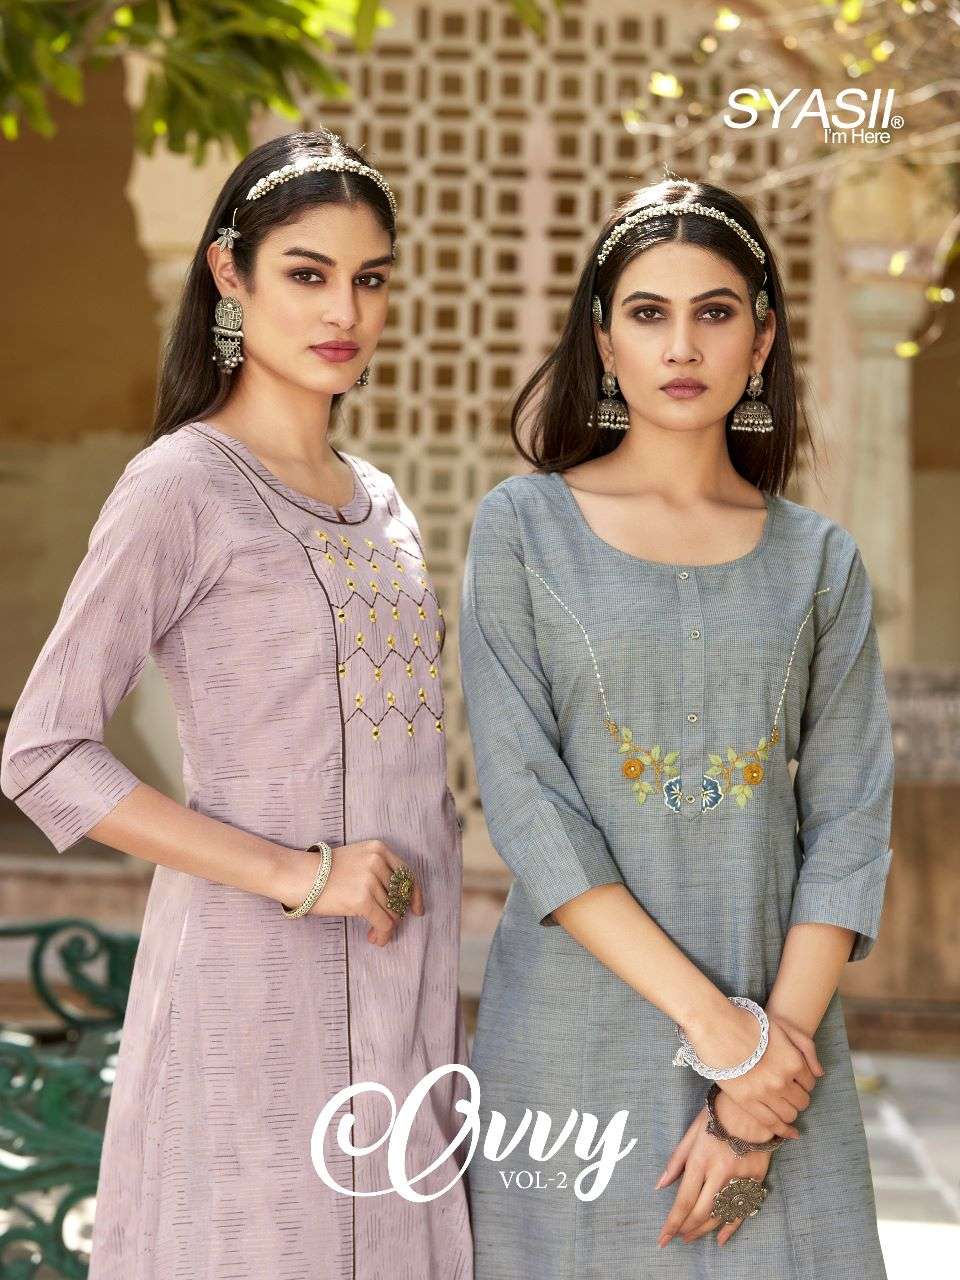 syasii presented ovvy vol 2 stylish pure and heavy cotton kurties